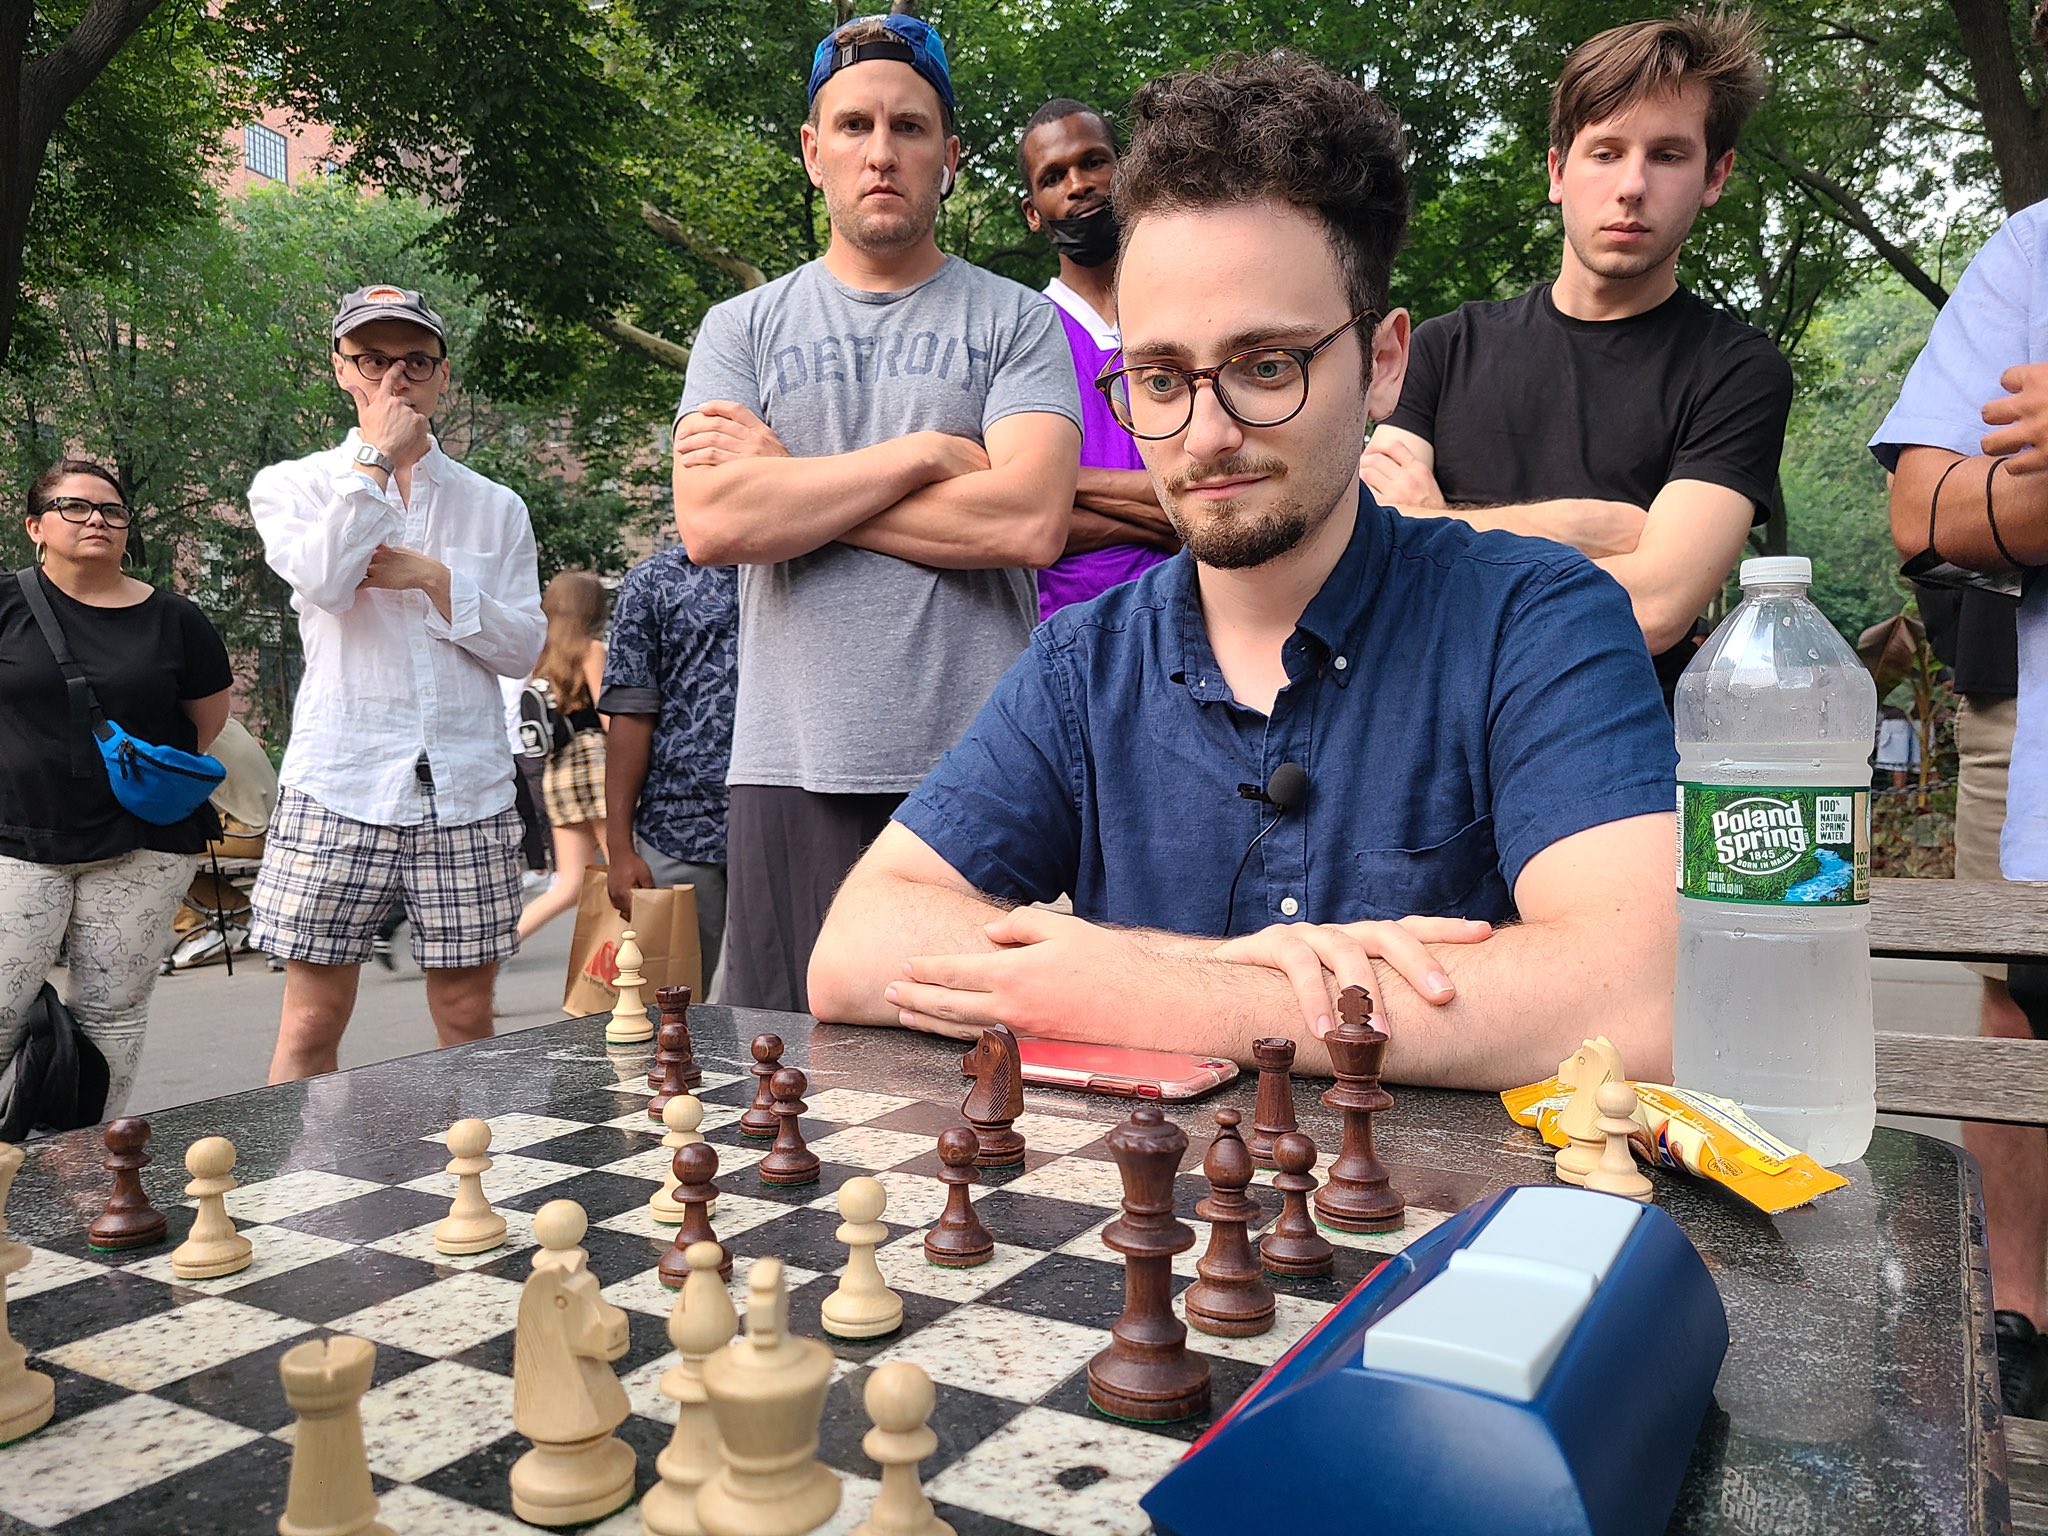 GothamChess on X: Played some chess in Washington Square Park today. Very  fun, tons of people—humbled by how big chess has gotten and appreciate you  all!  / X